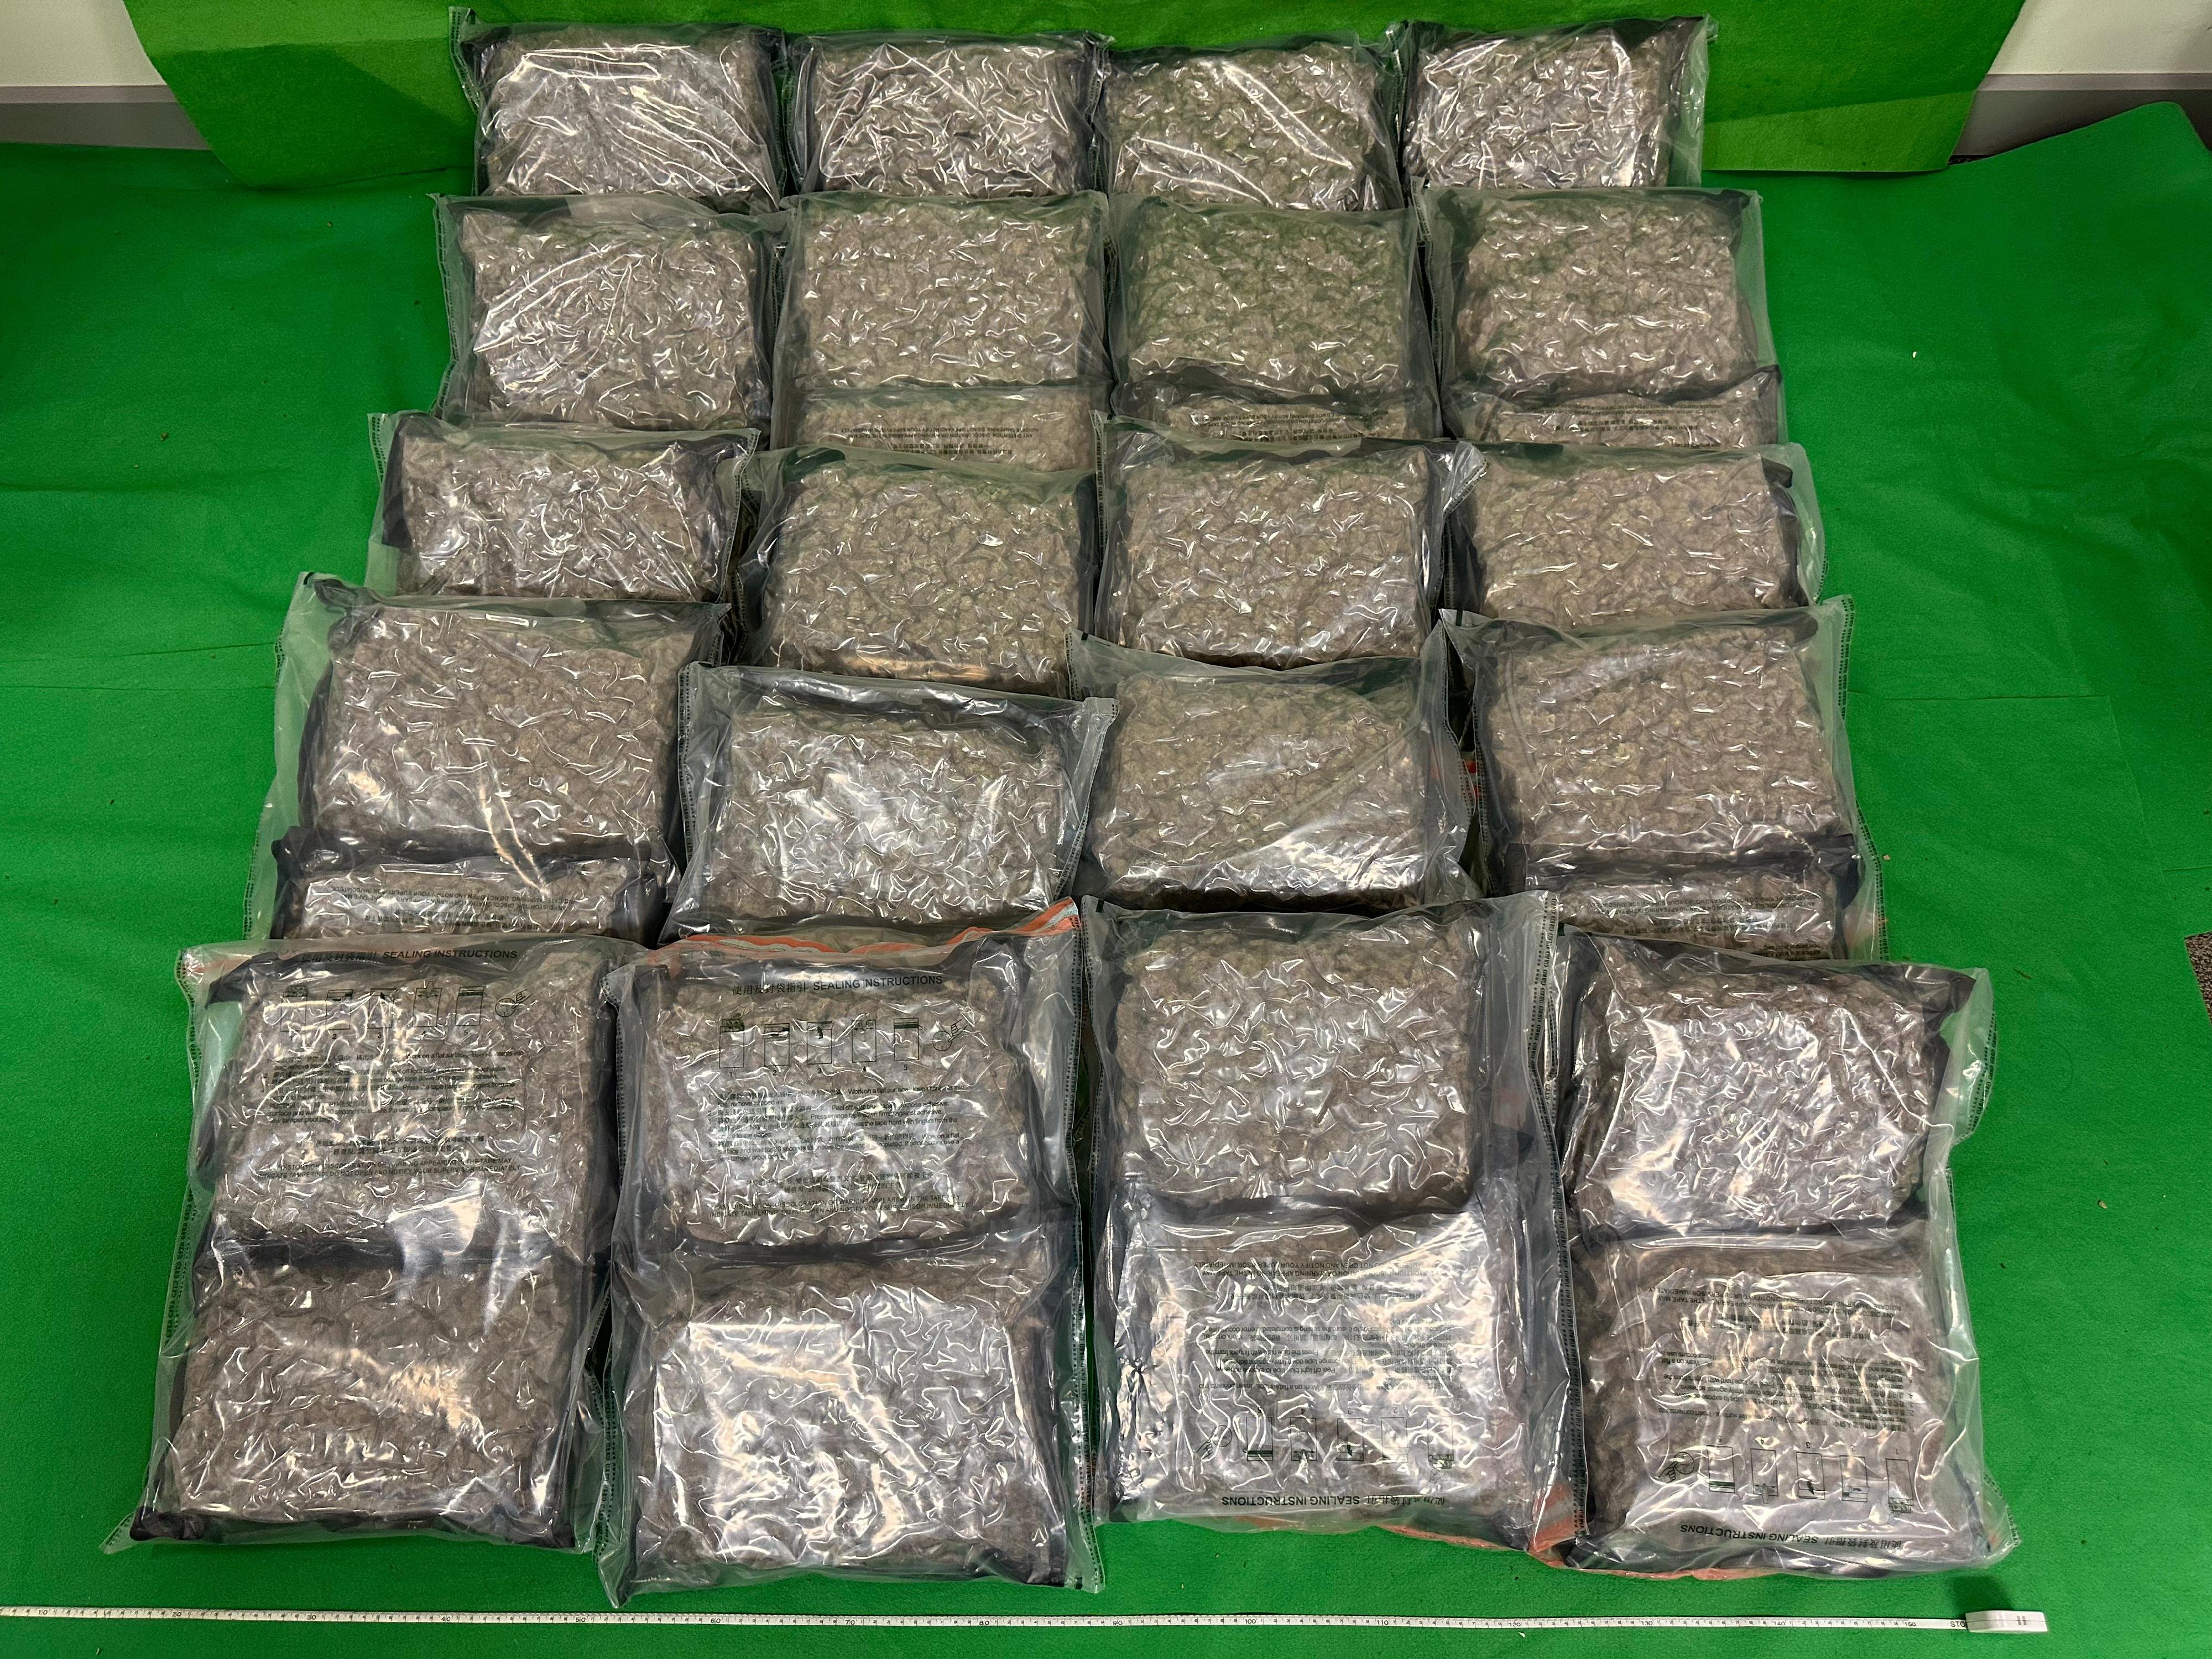 Hong Kong Customs yesterday (April 28) detected three drug trafficking cases involving baggage concealment at Hong Kong International Airport and seized a total of about 32 kilograms of suspected methamphetamine, 27kg of suspected cannabis buds and 15kg of suspected heroin with a total estimated market value of about $37 million. Seven men were arrested. Photo shows the suspected cannabis buds seized in the first case.


